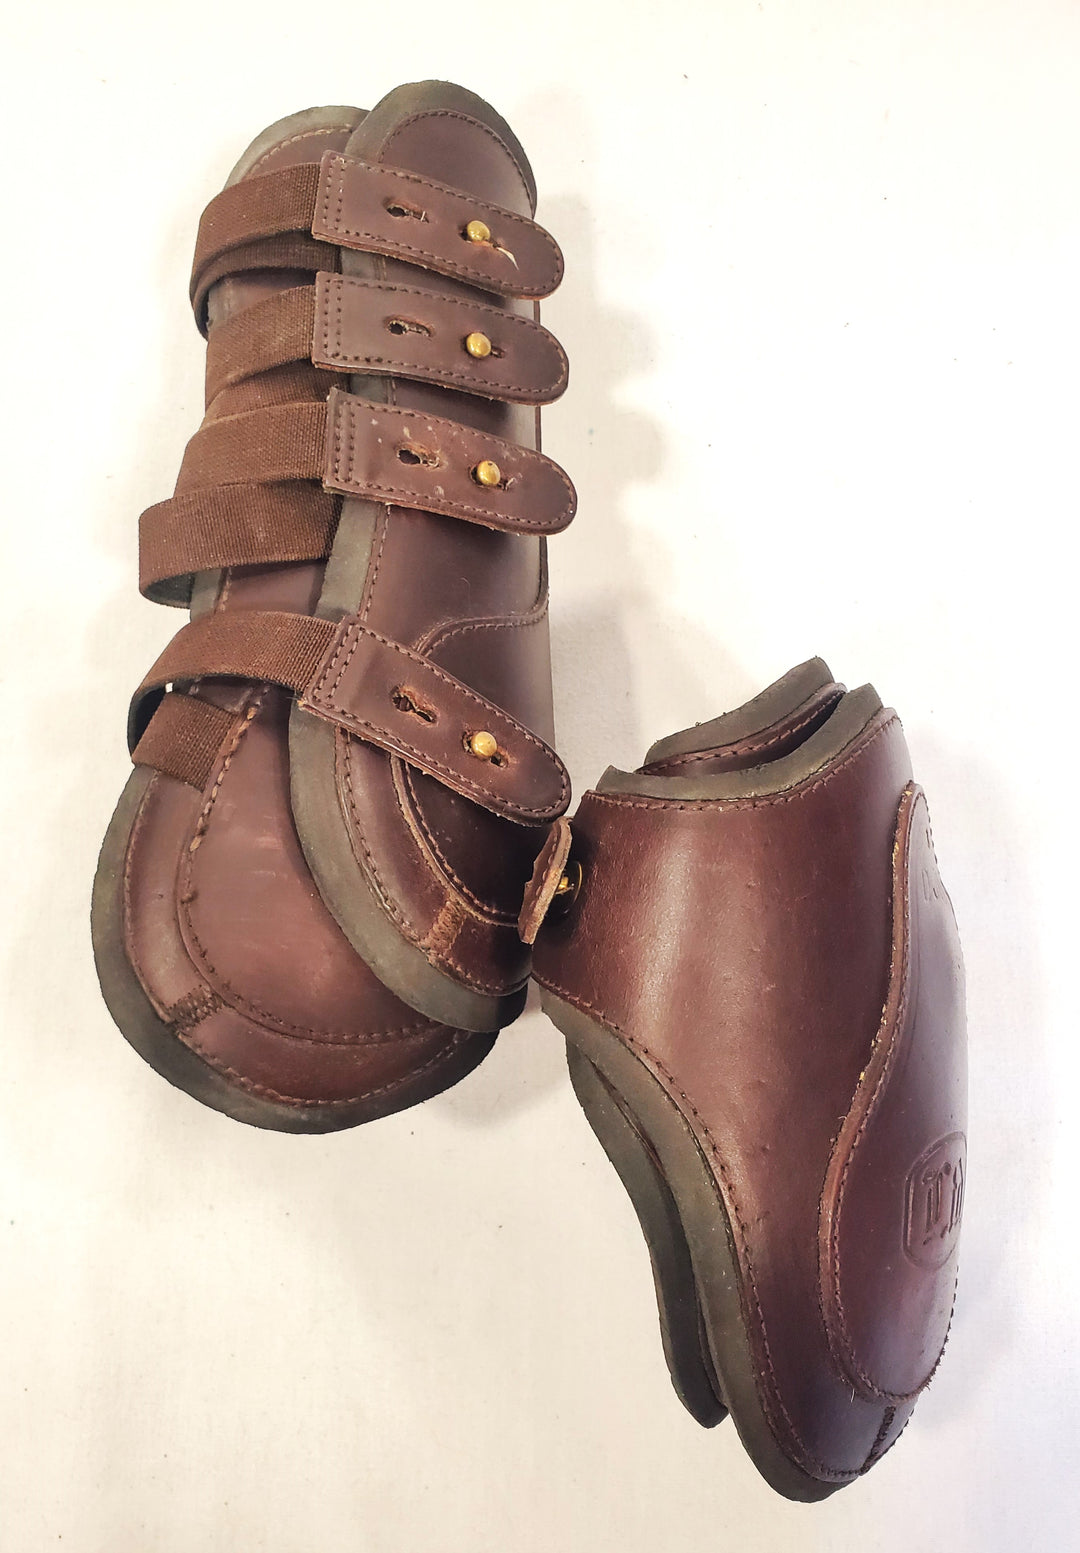 Beval Ltd. Front and Ankle Boots - (3) Large